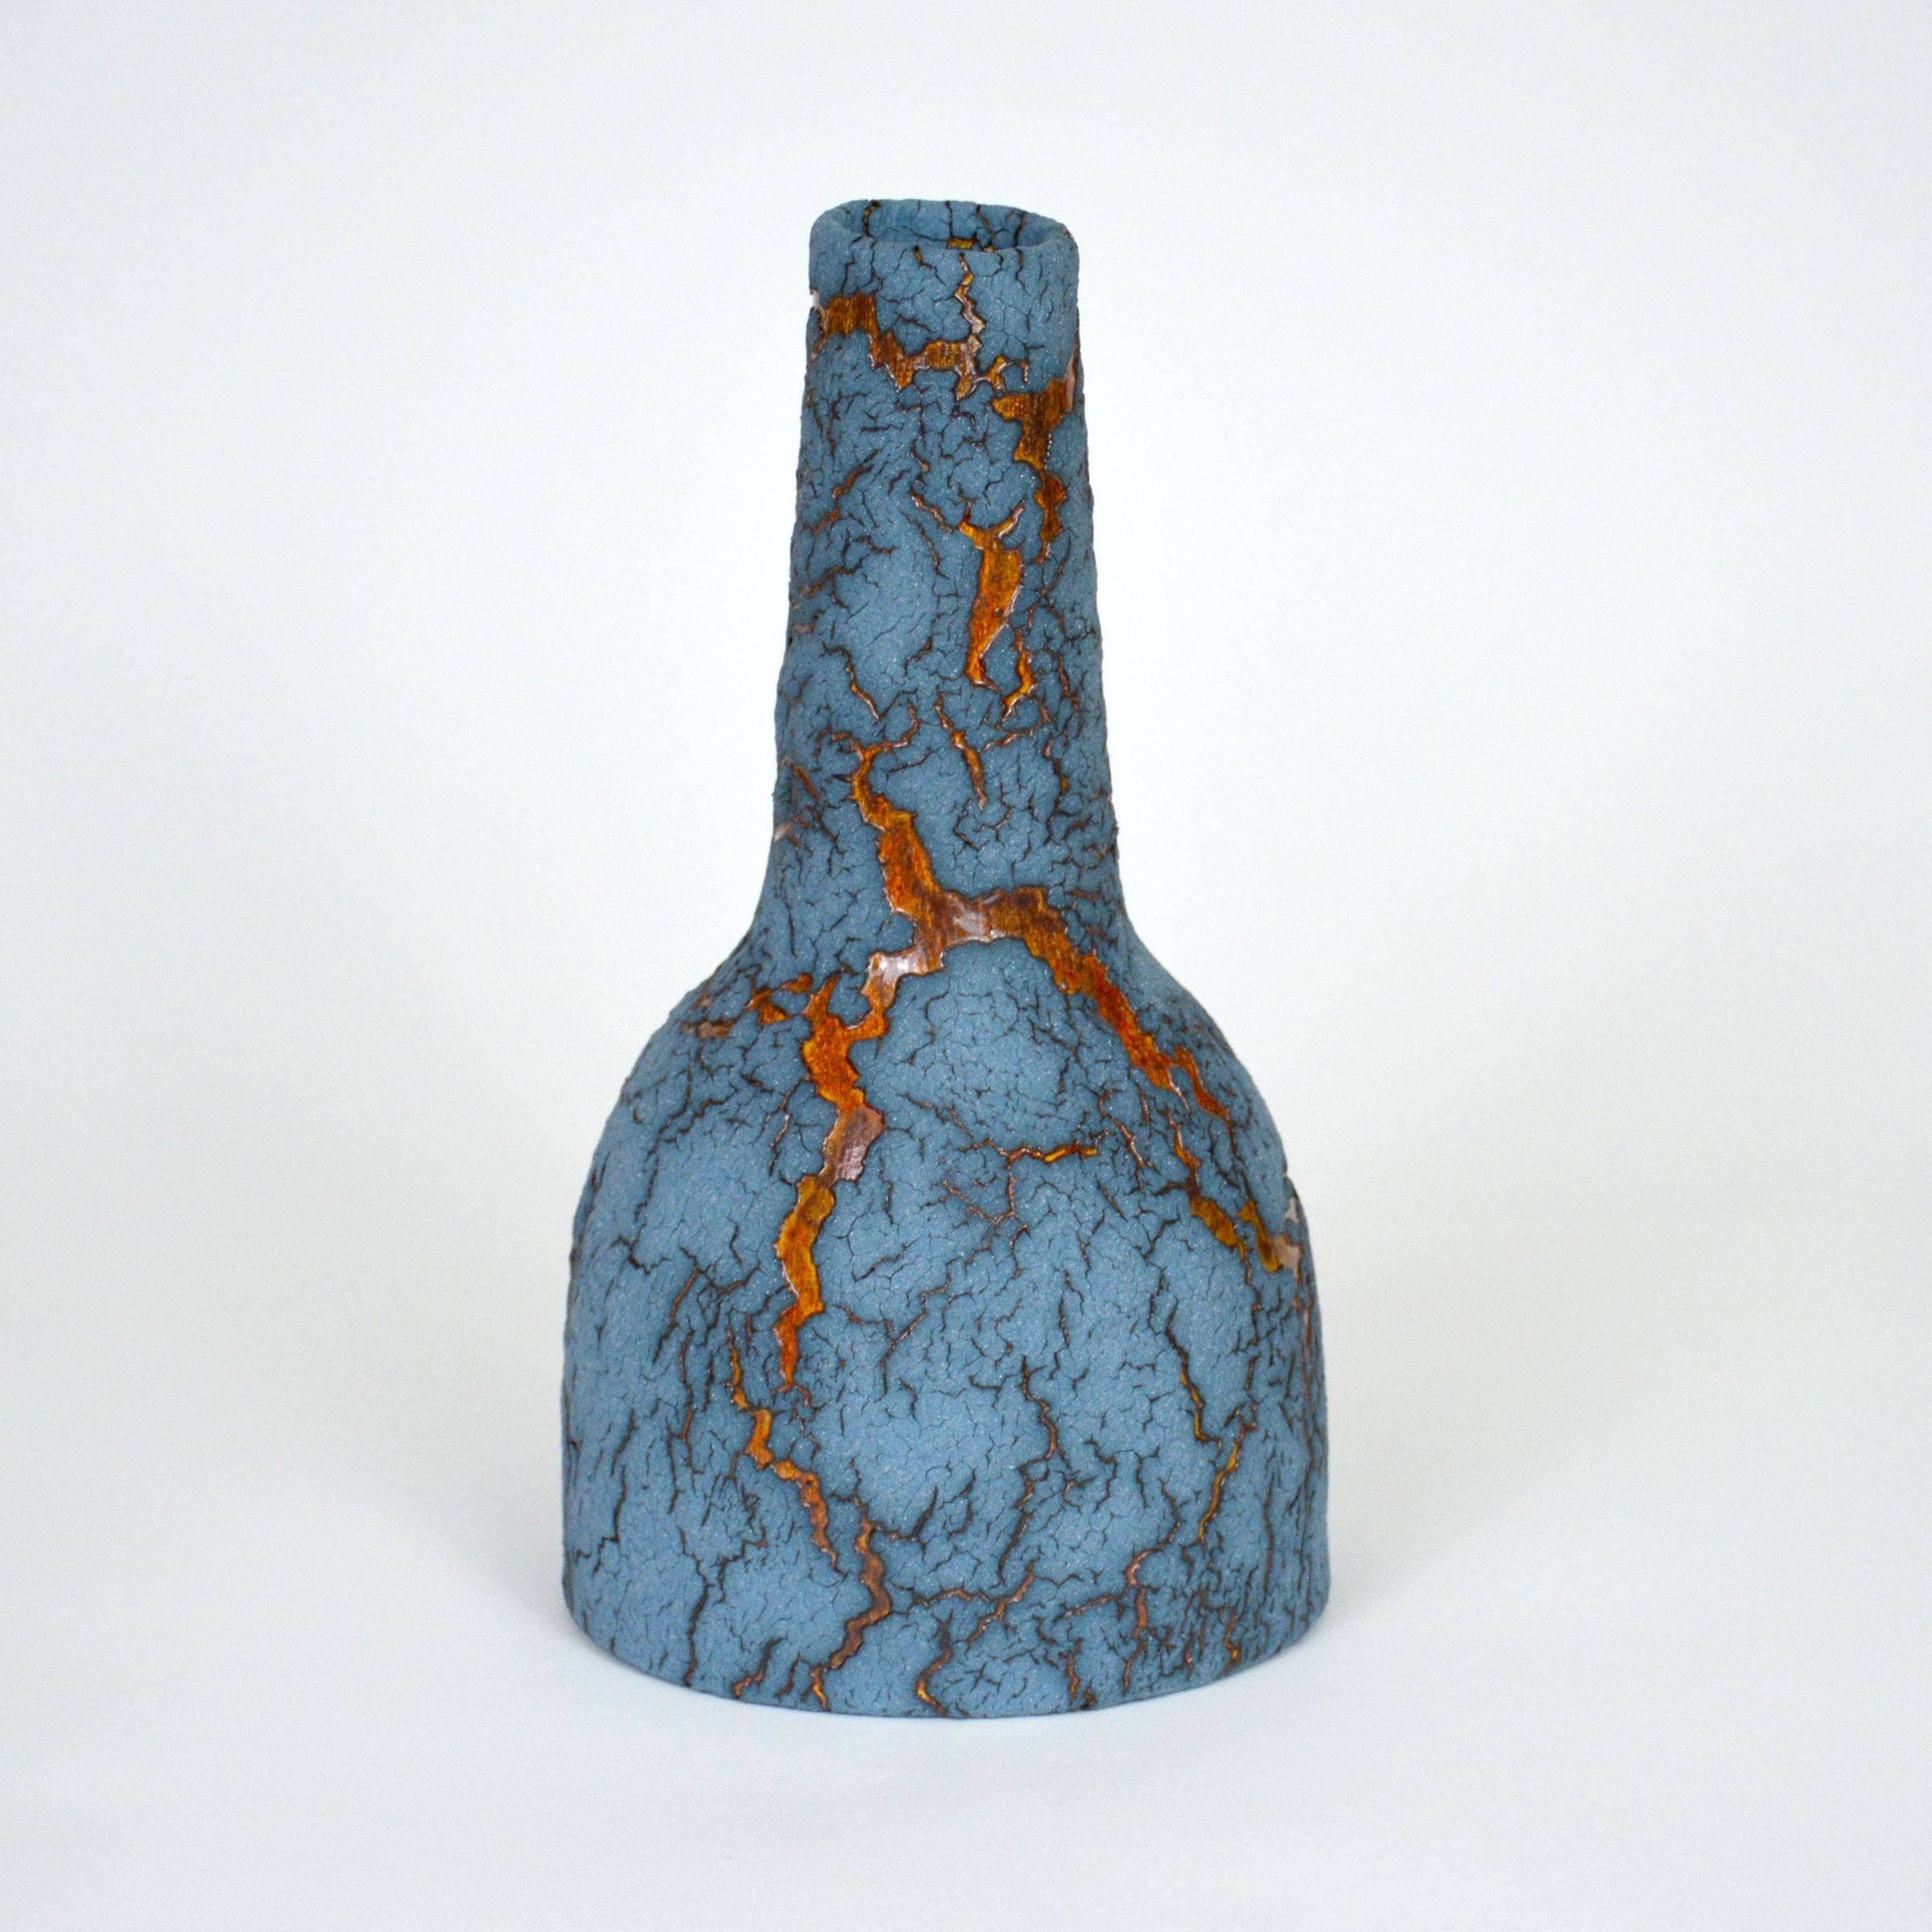 Ceramic Bottle by William Edwards
Hand built earthenware vessel, fired multiple times to achieve a textured surface of random abstraction, matte blue with amber gloss microcrystalline glaze breaking through that sparkles in certain lighting